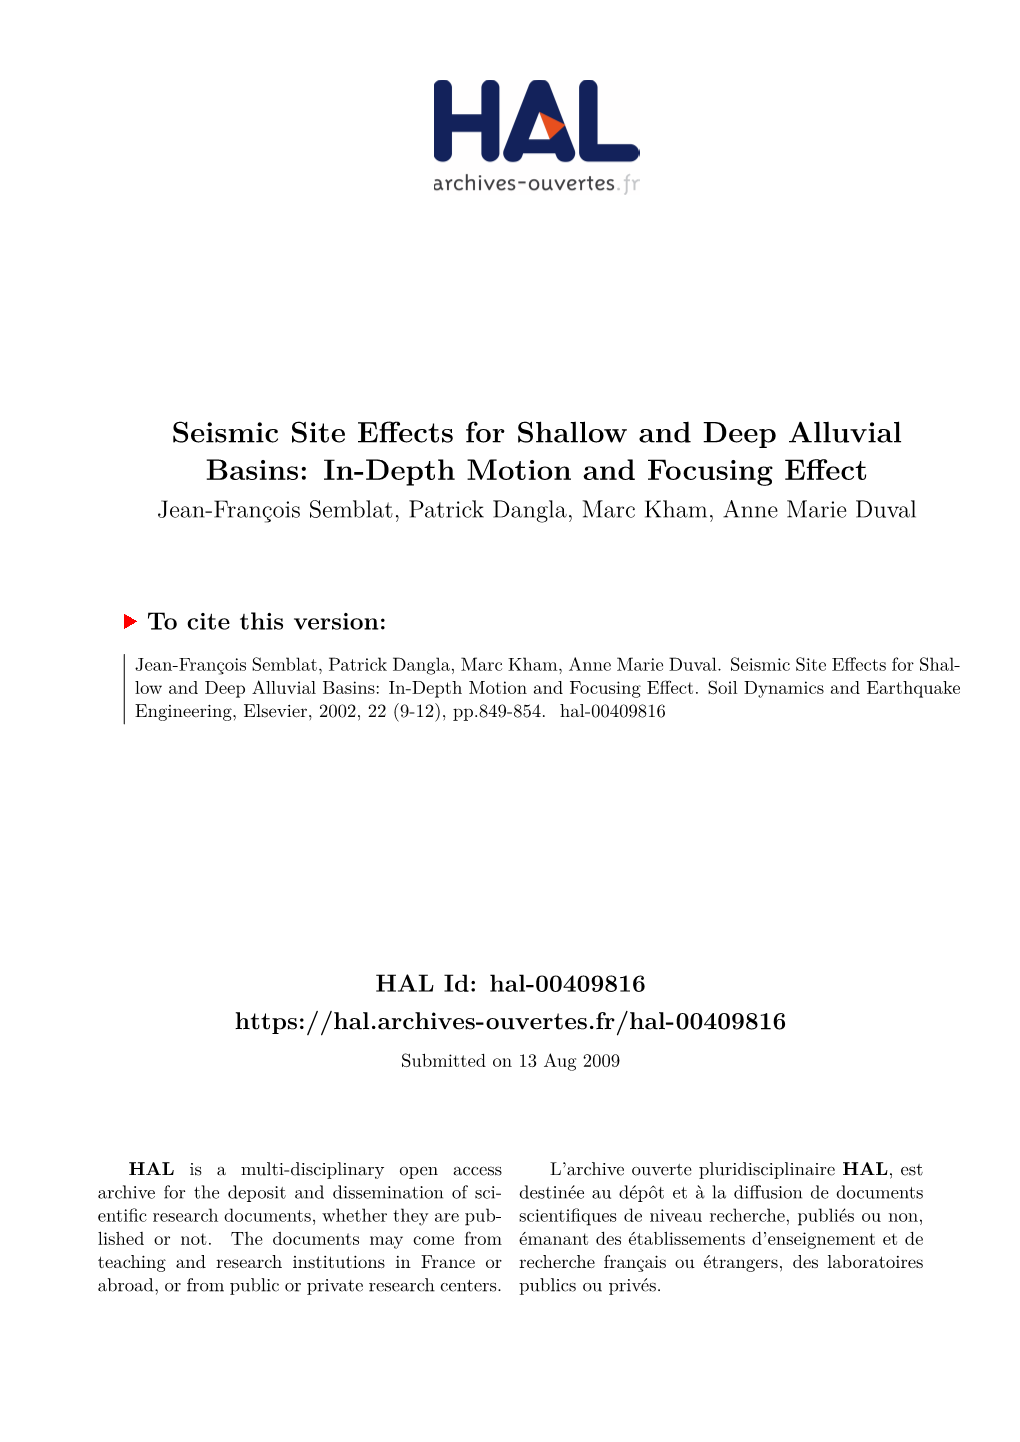 Seismic Site Effects for Shallow and Deep Alluvial Basins: In-Depth Motion and Focusing Effect Jean-François Semblat, Patrick Dangla, Marc Kham, Anne Marie Duval